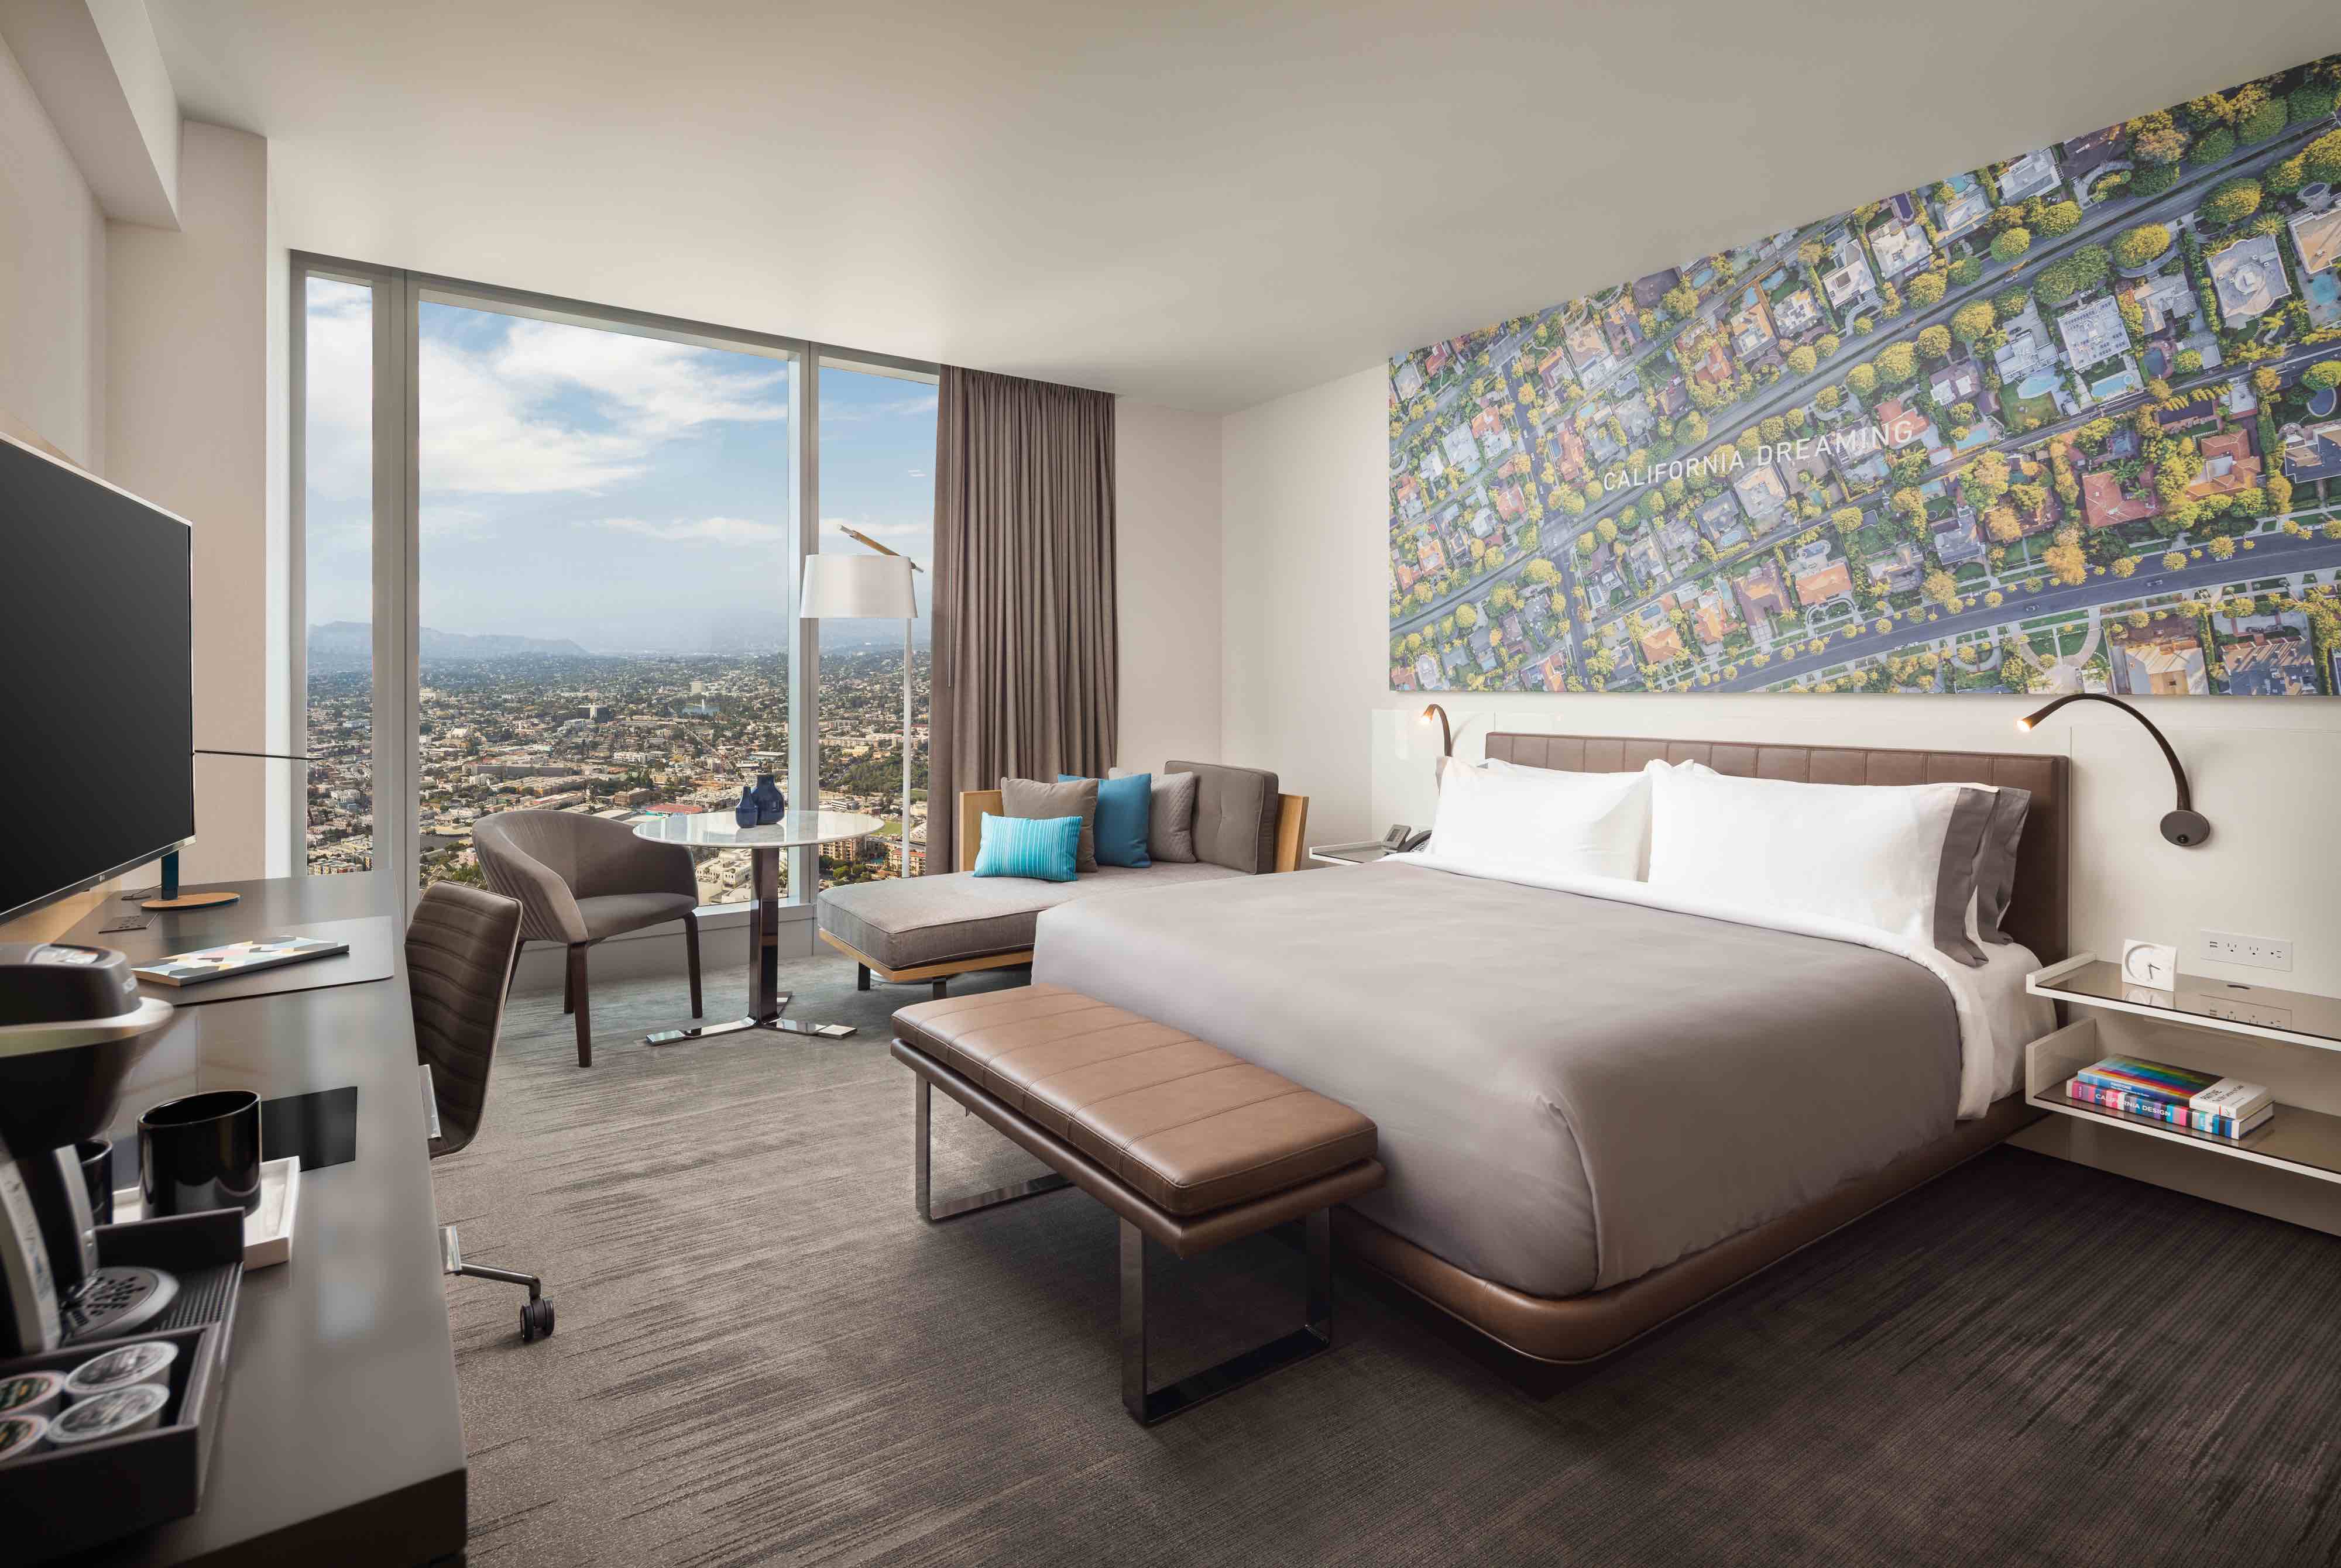 Los Angeles Hotels Hotels Used